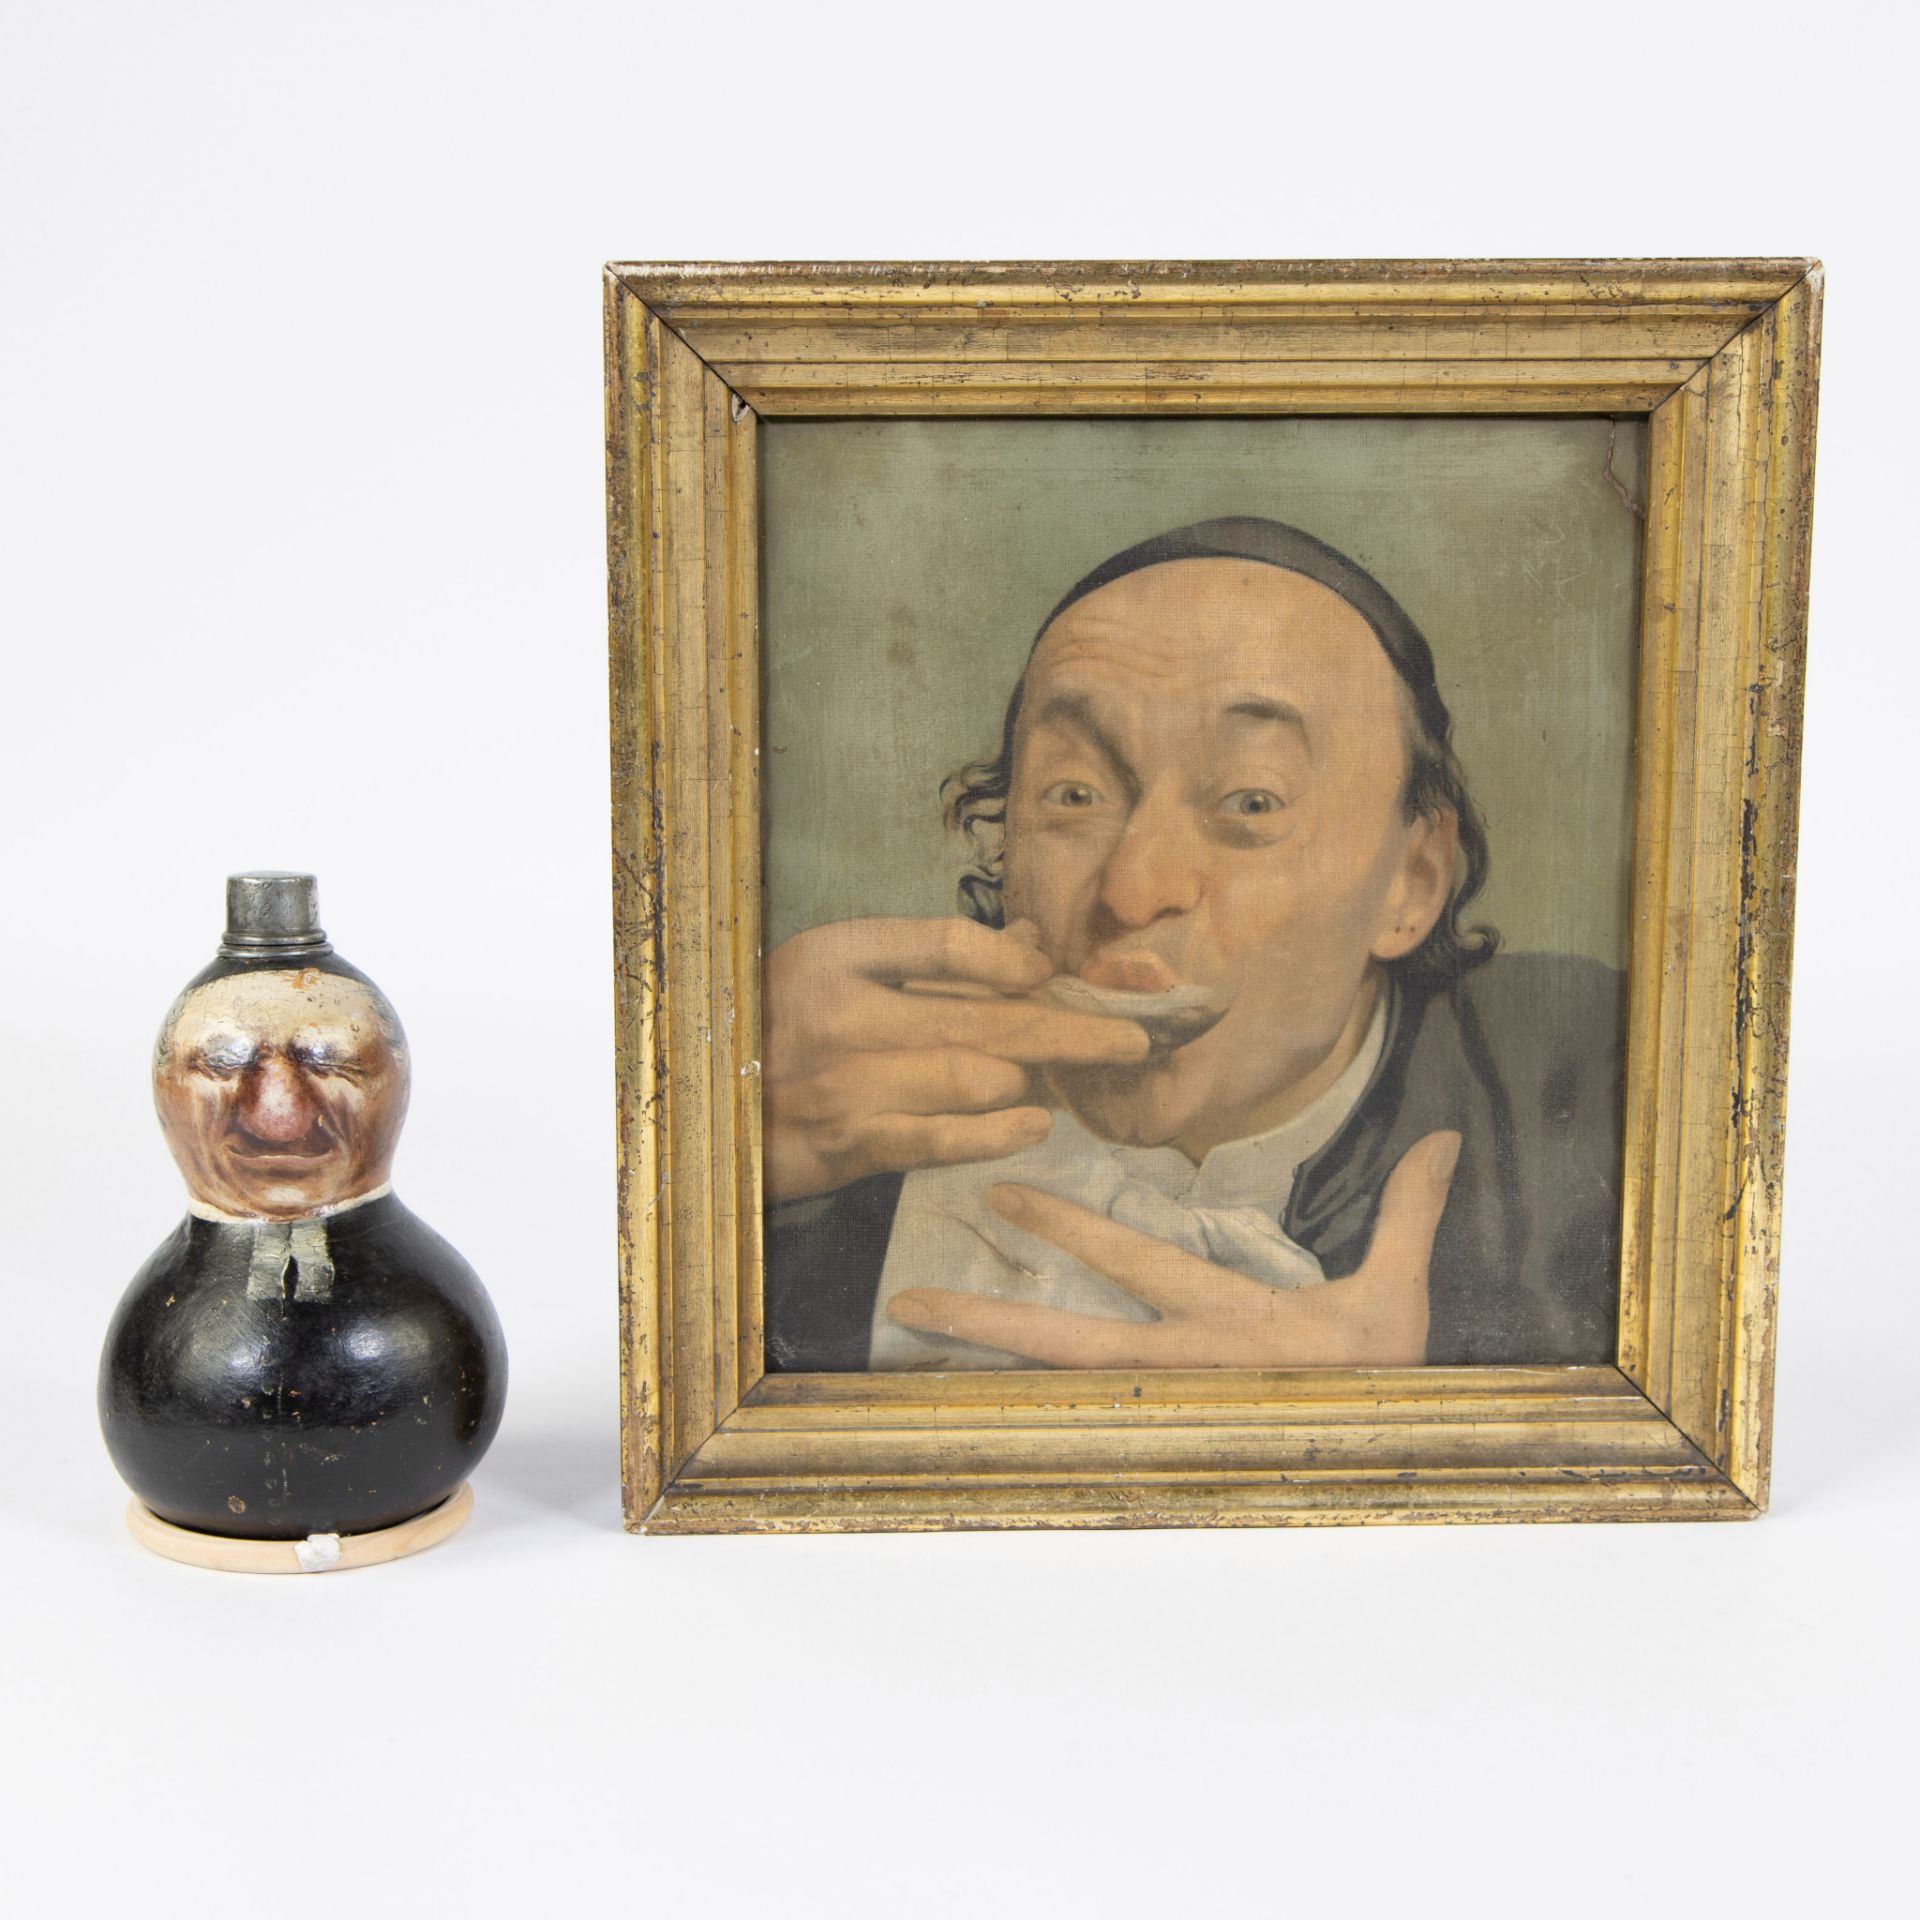 Lot of a rare gourd painted bottle with decor of a clergyman, pewter screw cap, French early 19th ce